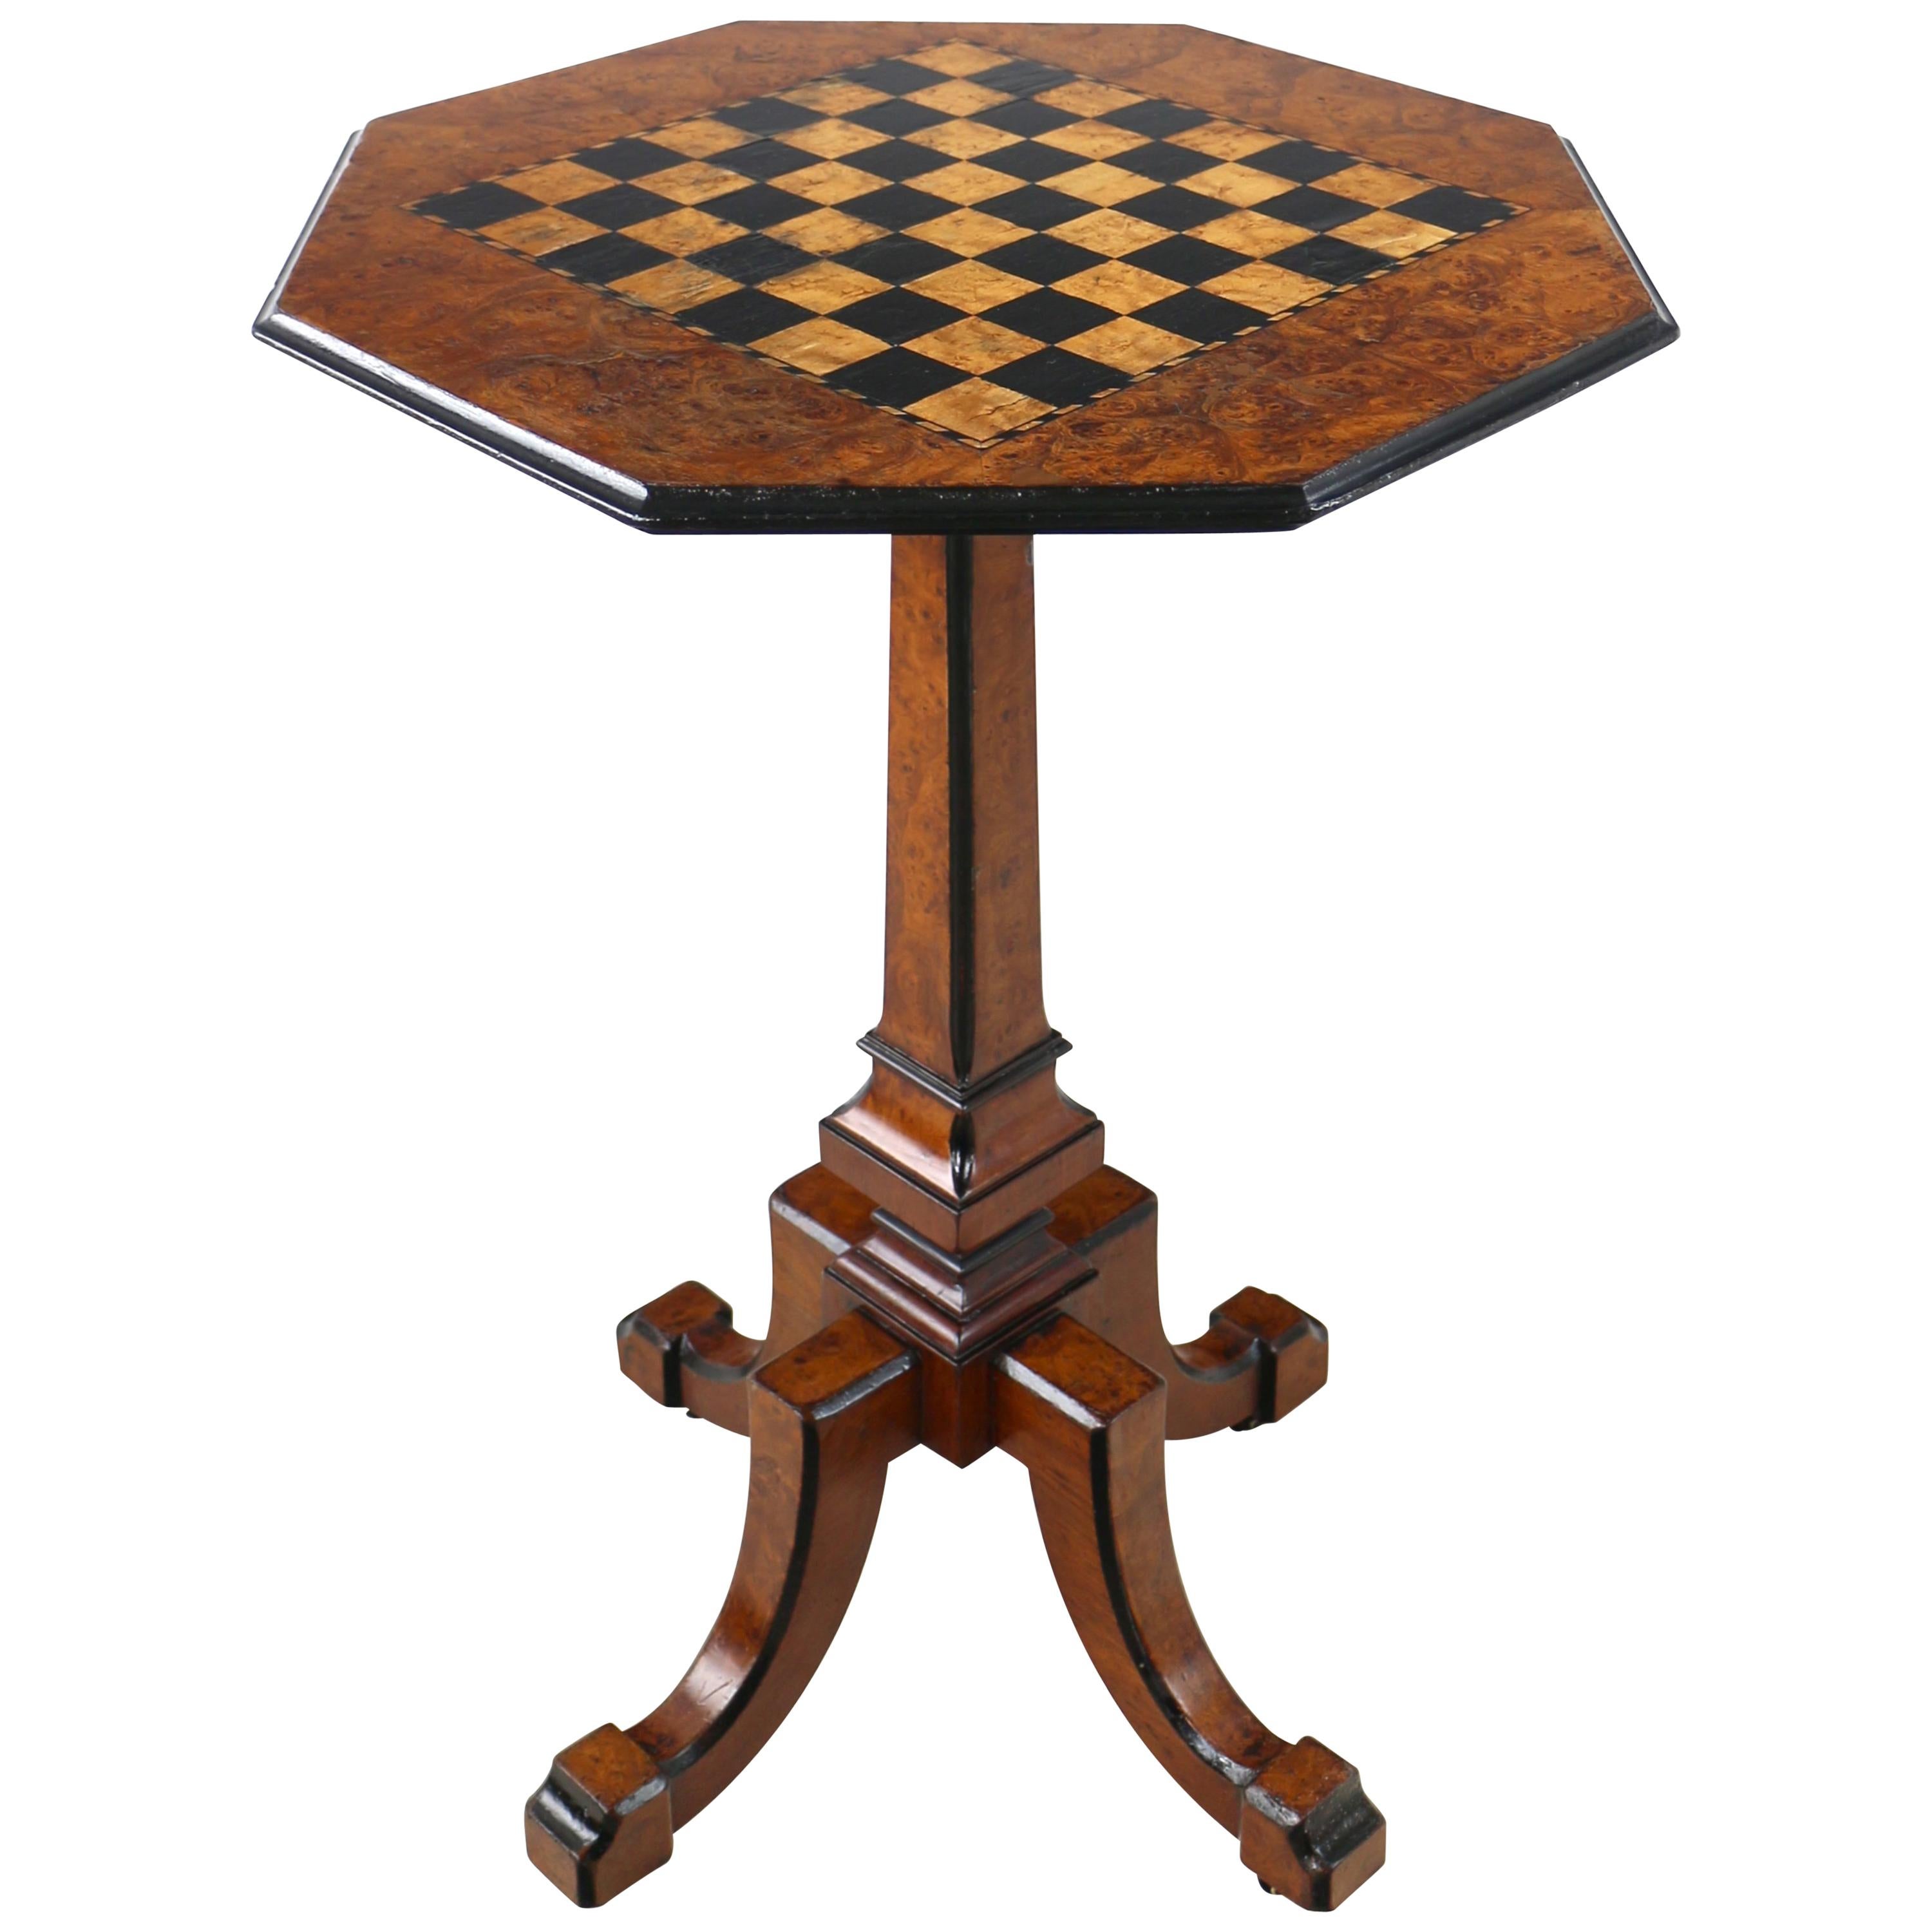 Antique Irish Killarney Yew Inlaid Chess Top Games Occasional Table